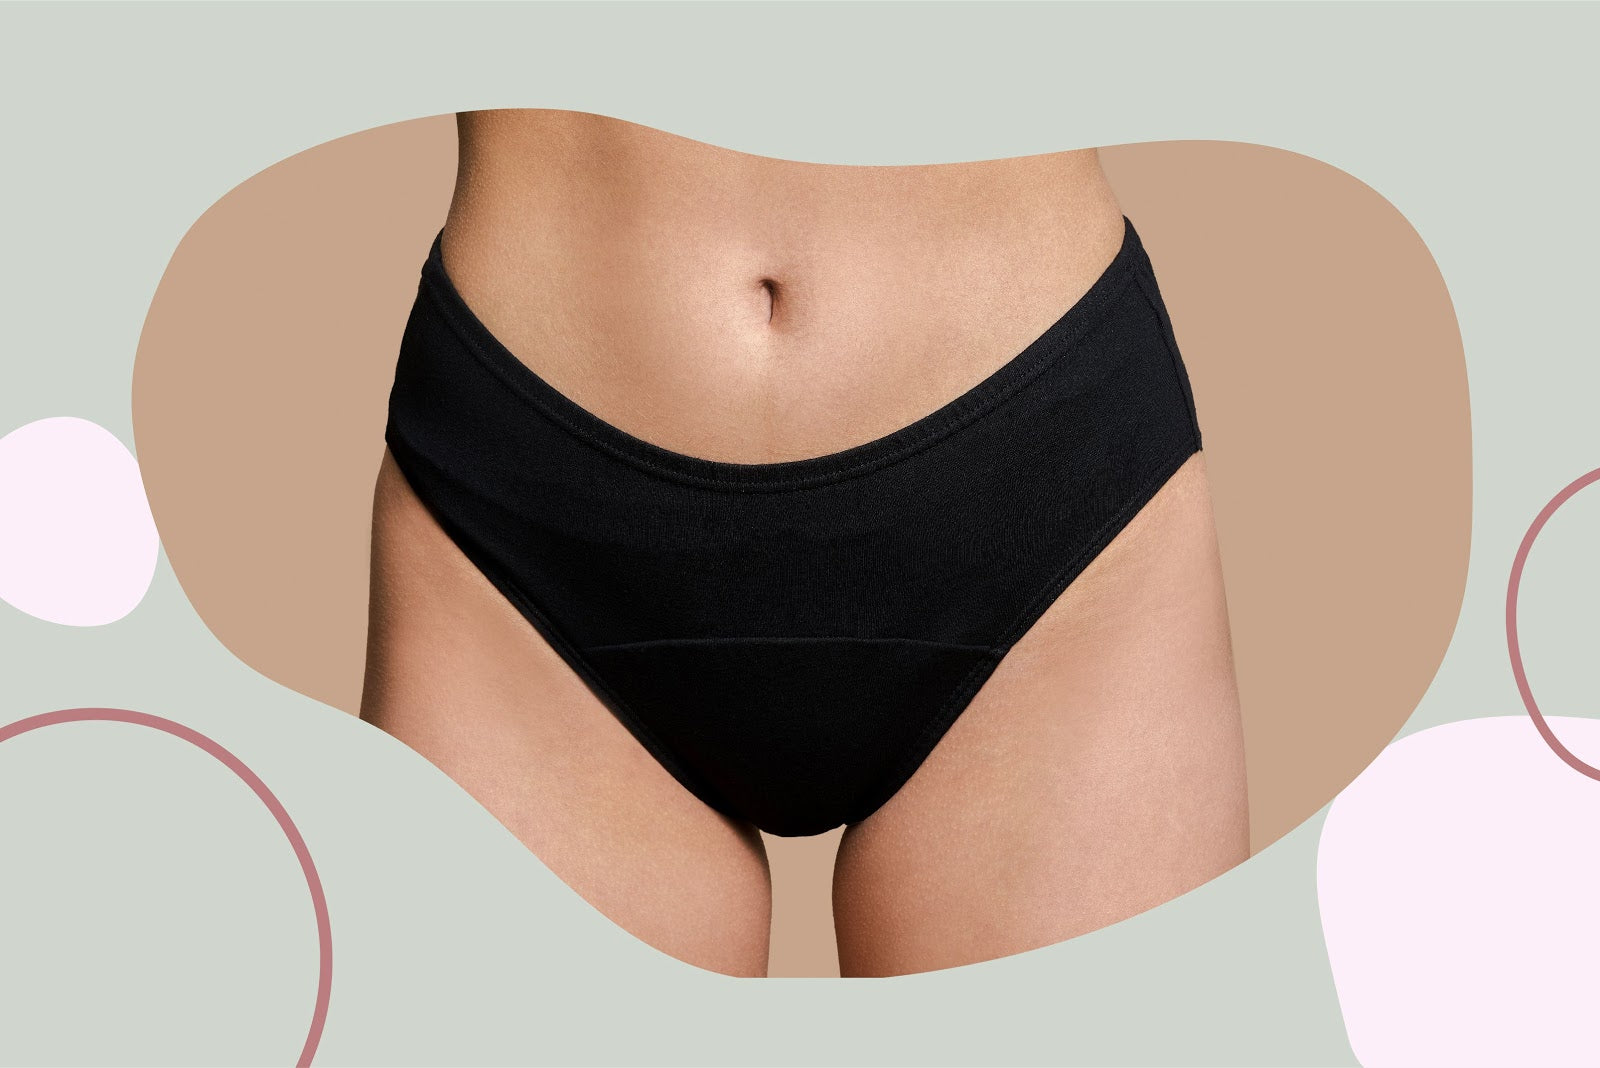 Are the period panties free from PFAS?